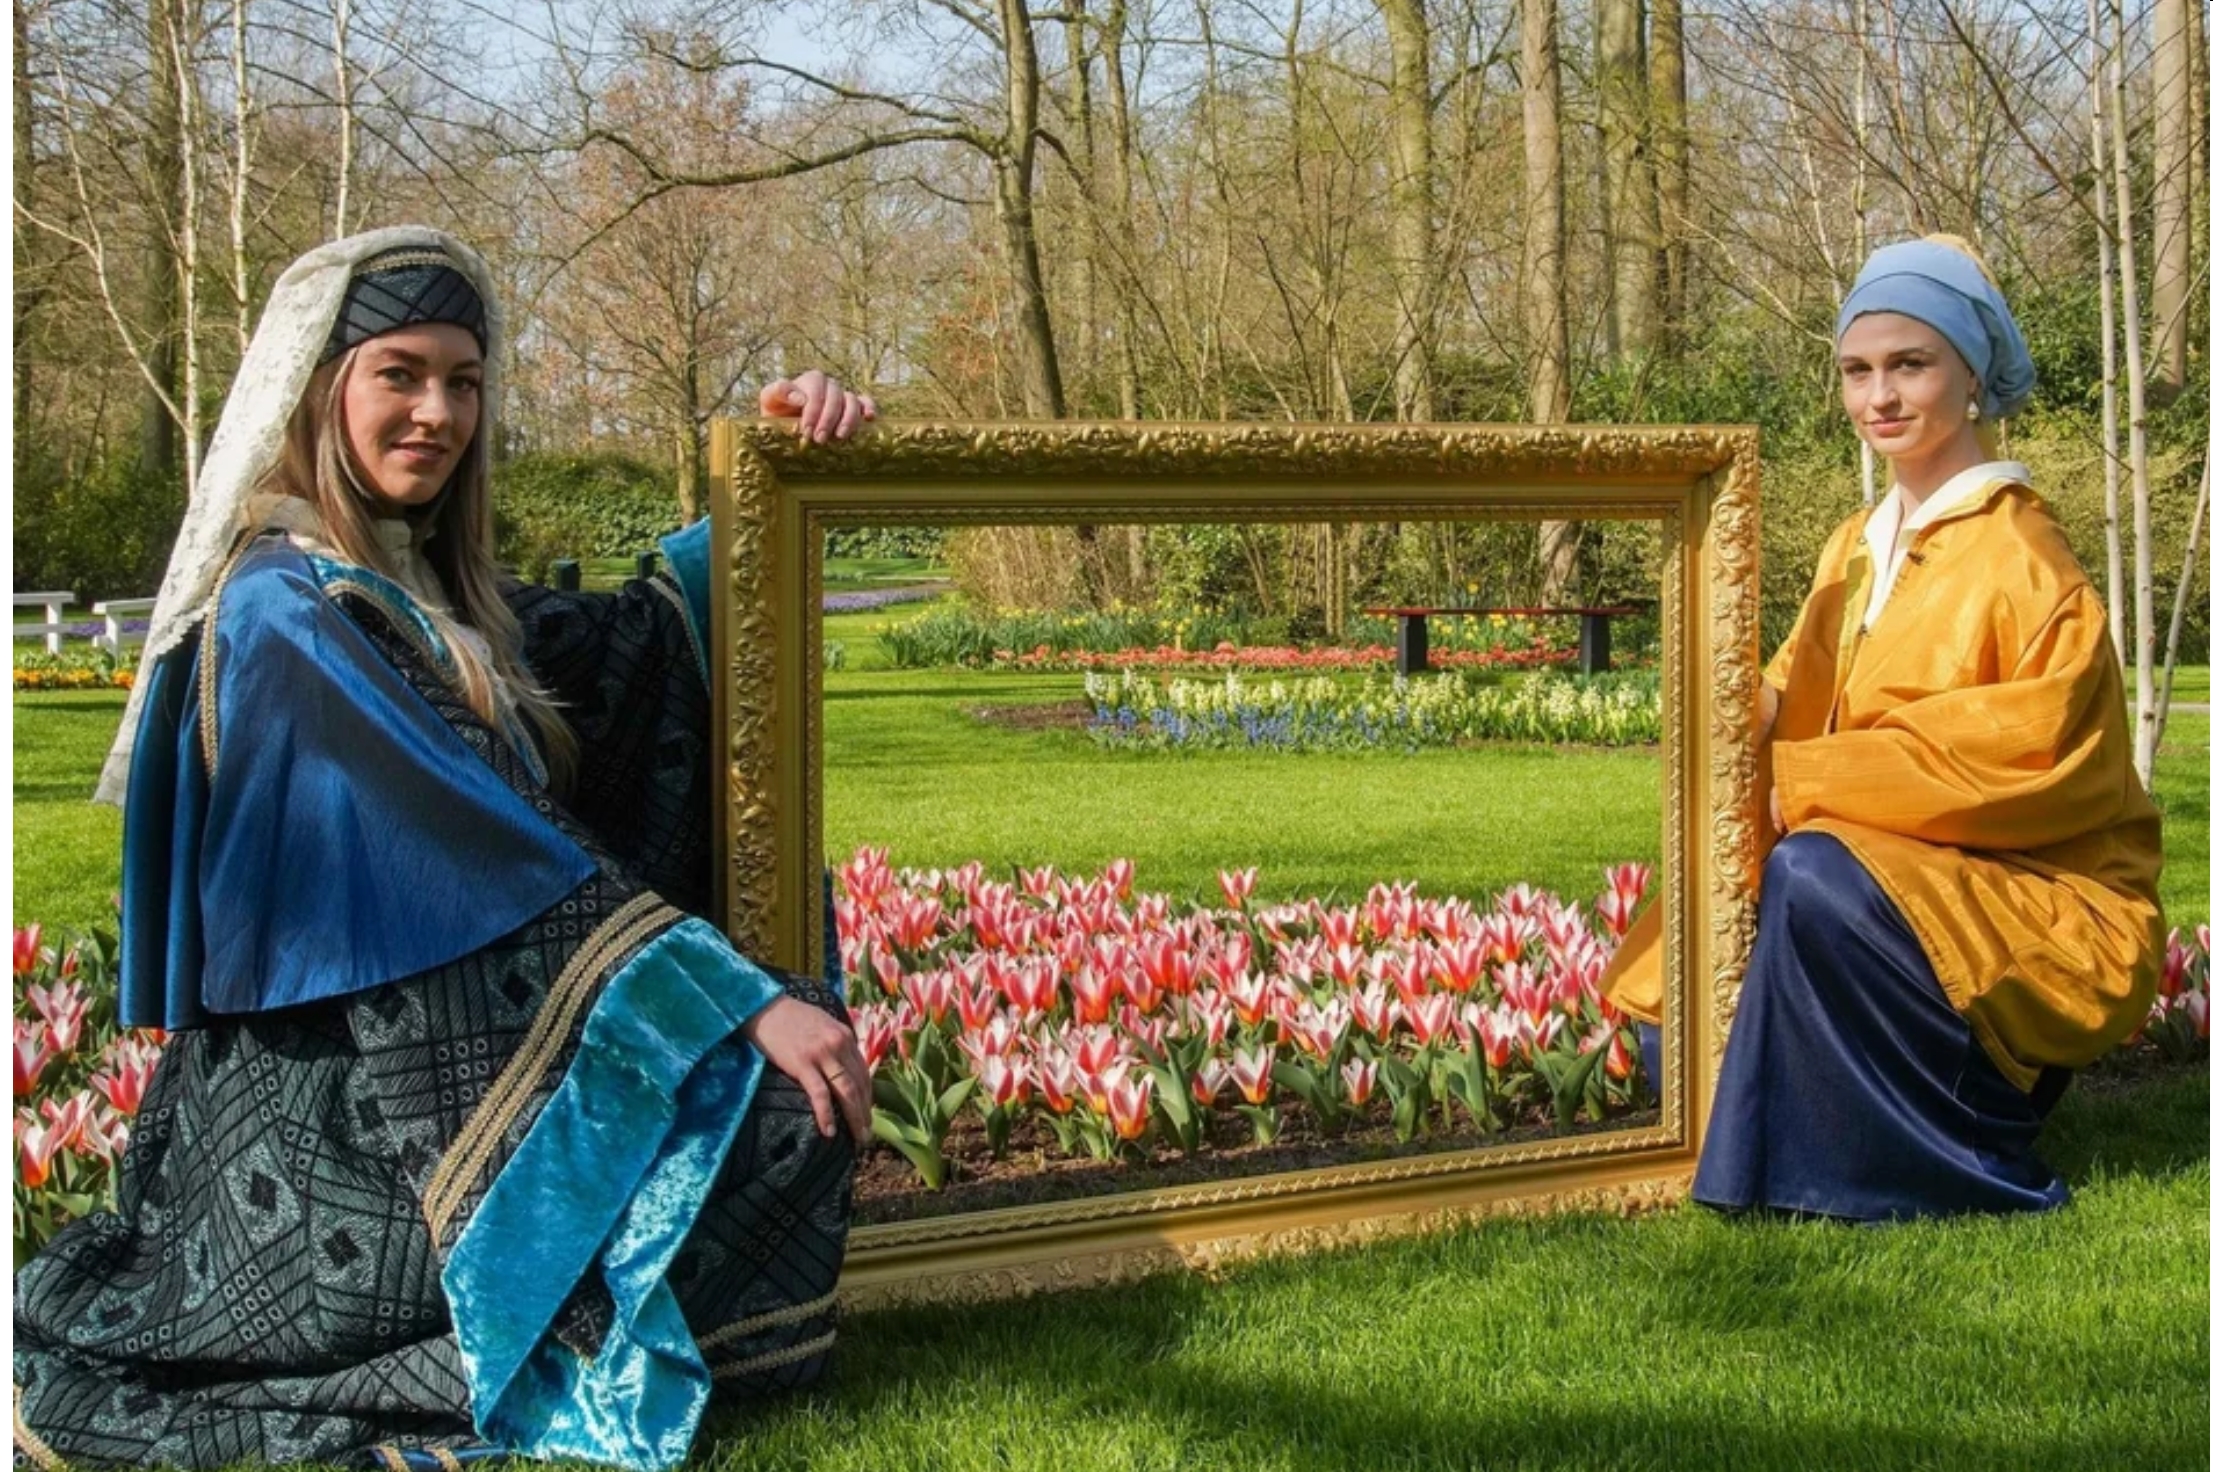 The Countess of Hainaut & Vermeers Girl with a Pearl Earring, holding a frame in floral park Keukenhof, the Netherlands.jpg